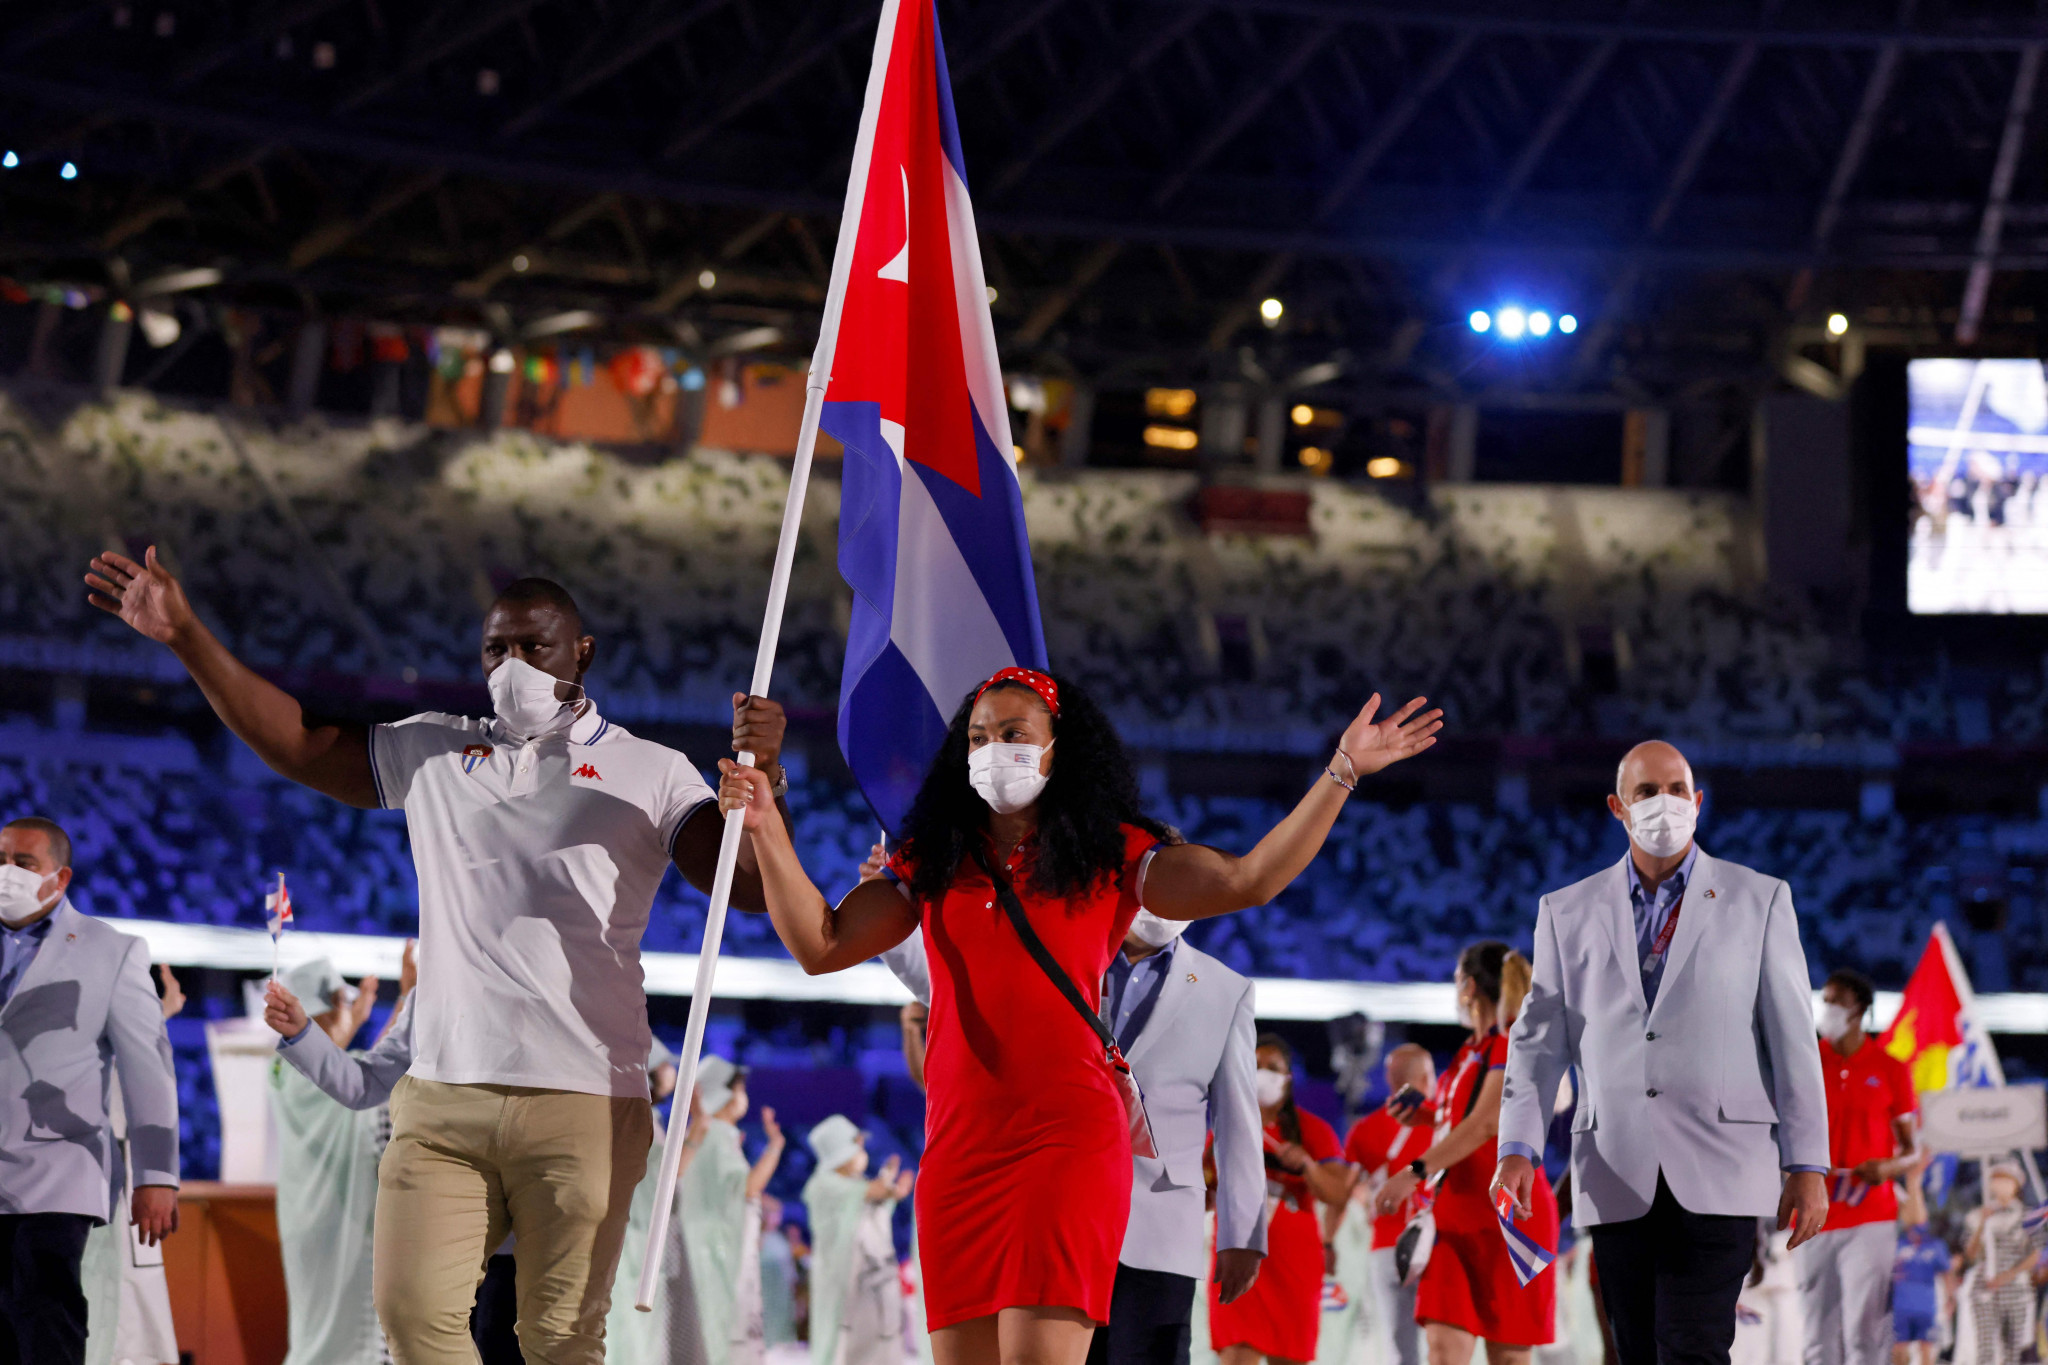 Cuba earned 21 golds at the Caribbean Games in Guadeloupe ©Getty Images